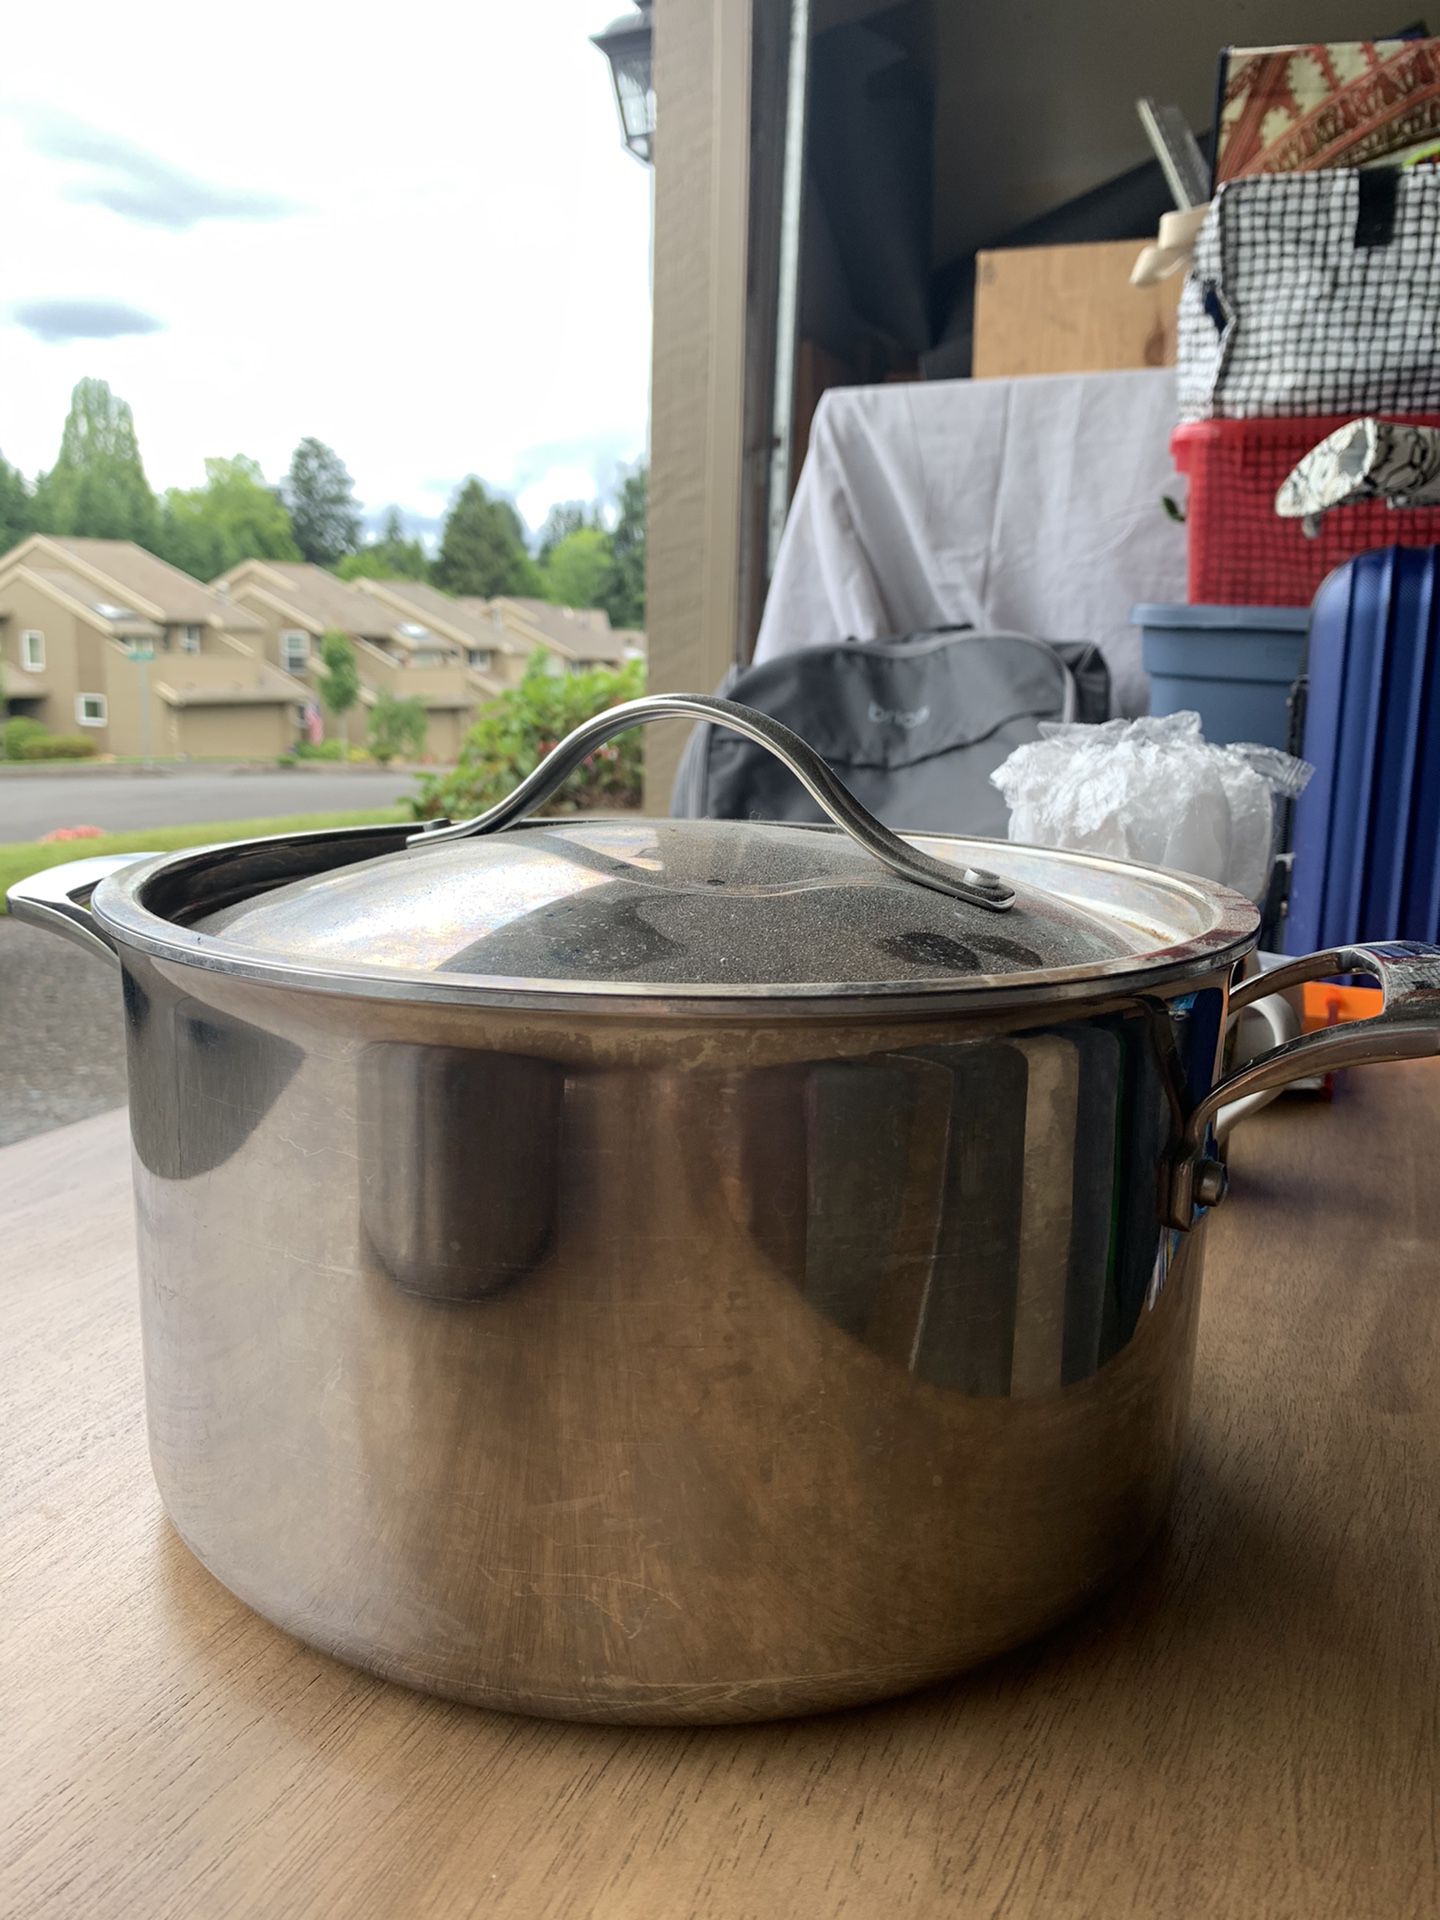 Stainless steel cooking pot and pan